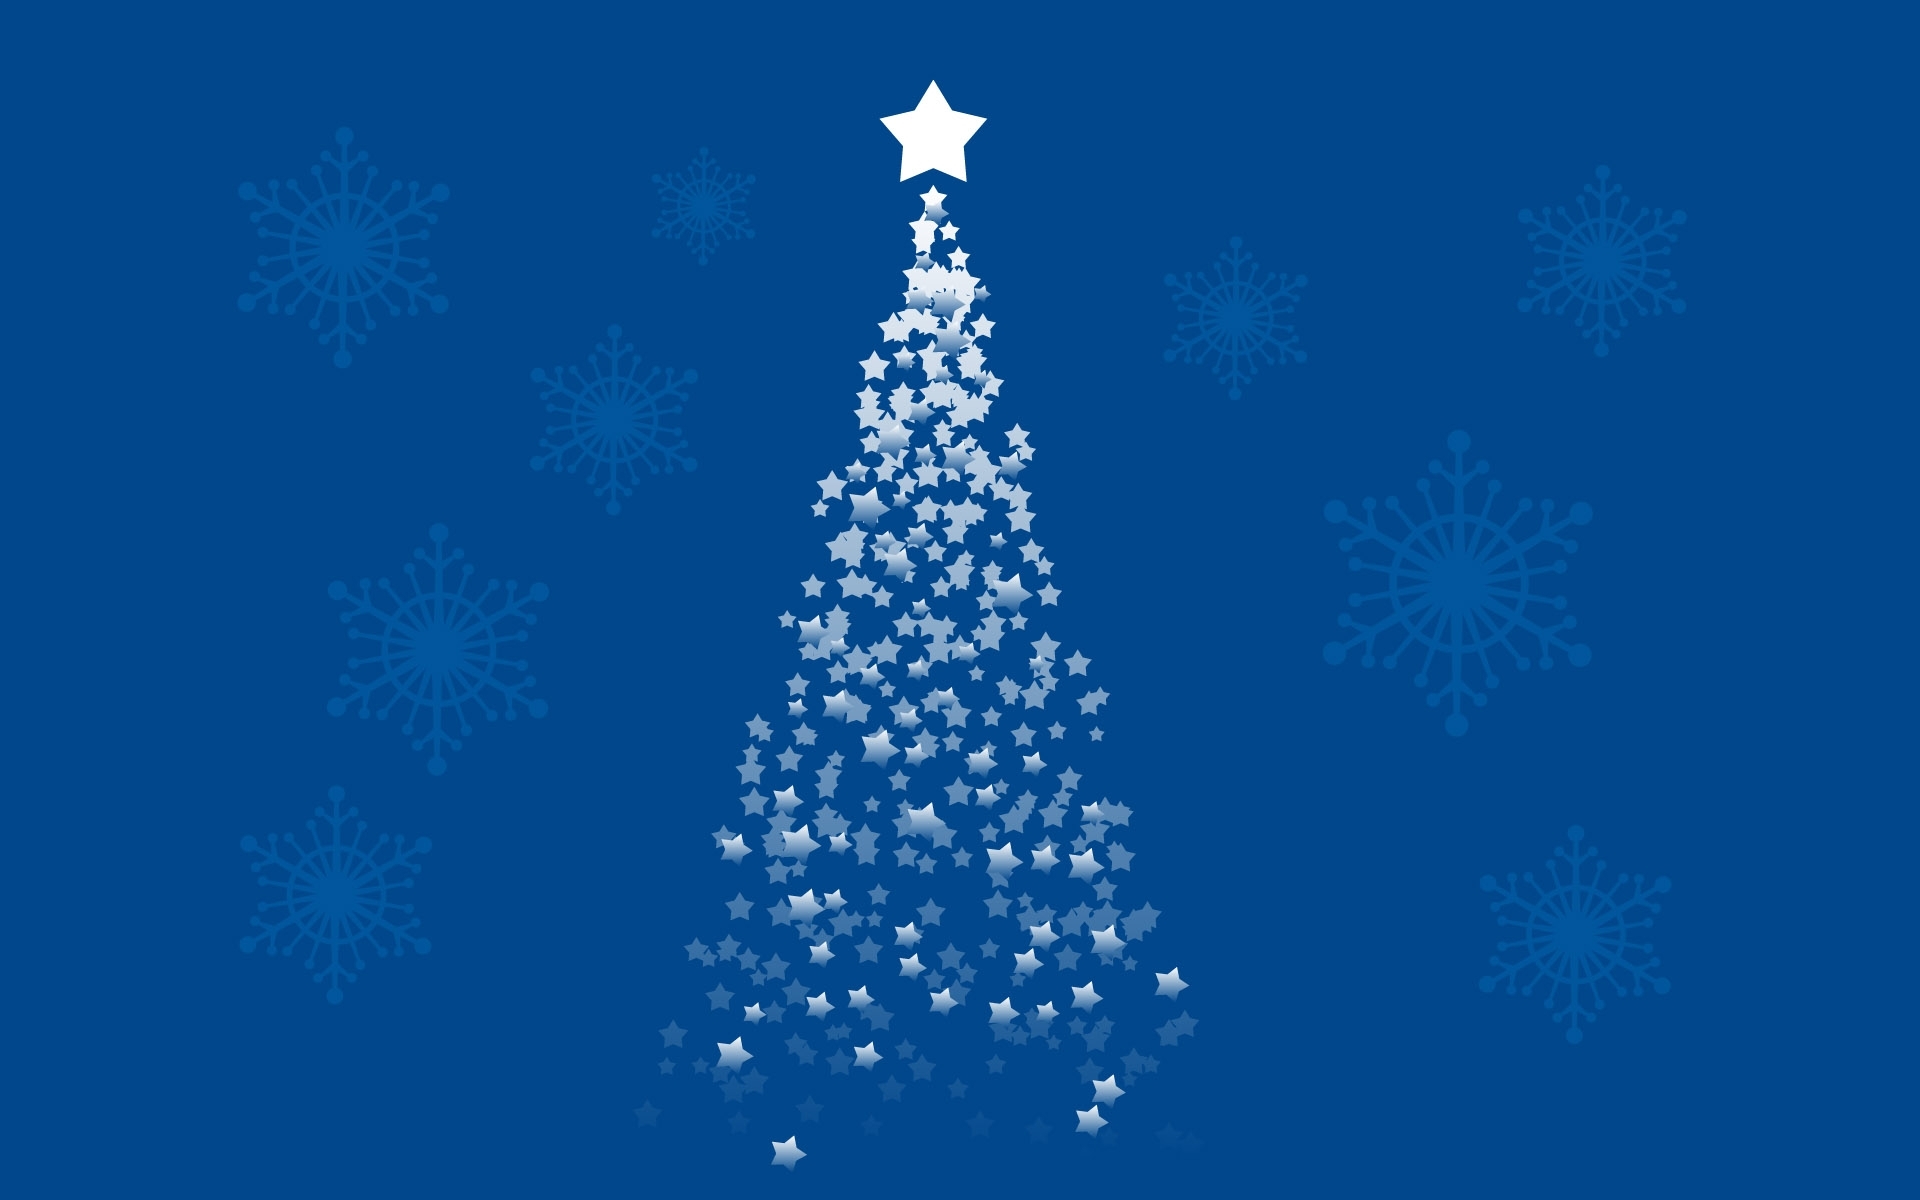 pictures, christmas xmas, holidays, stars, new year, fir trees, blue Aesthetic wallpaper